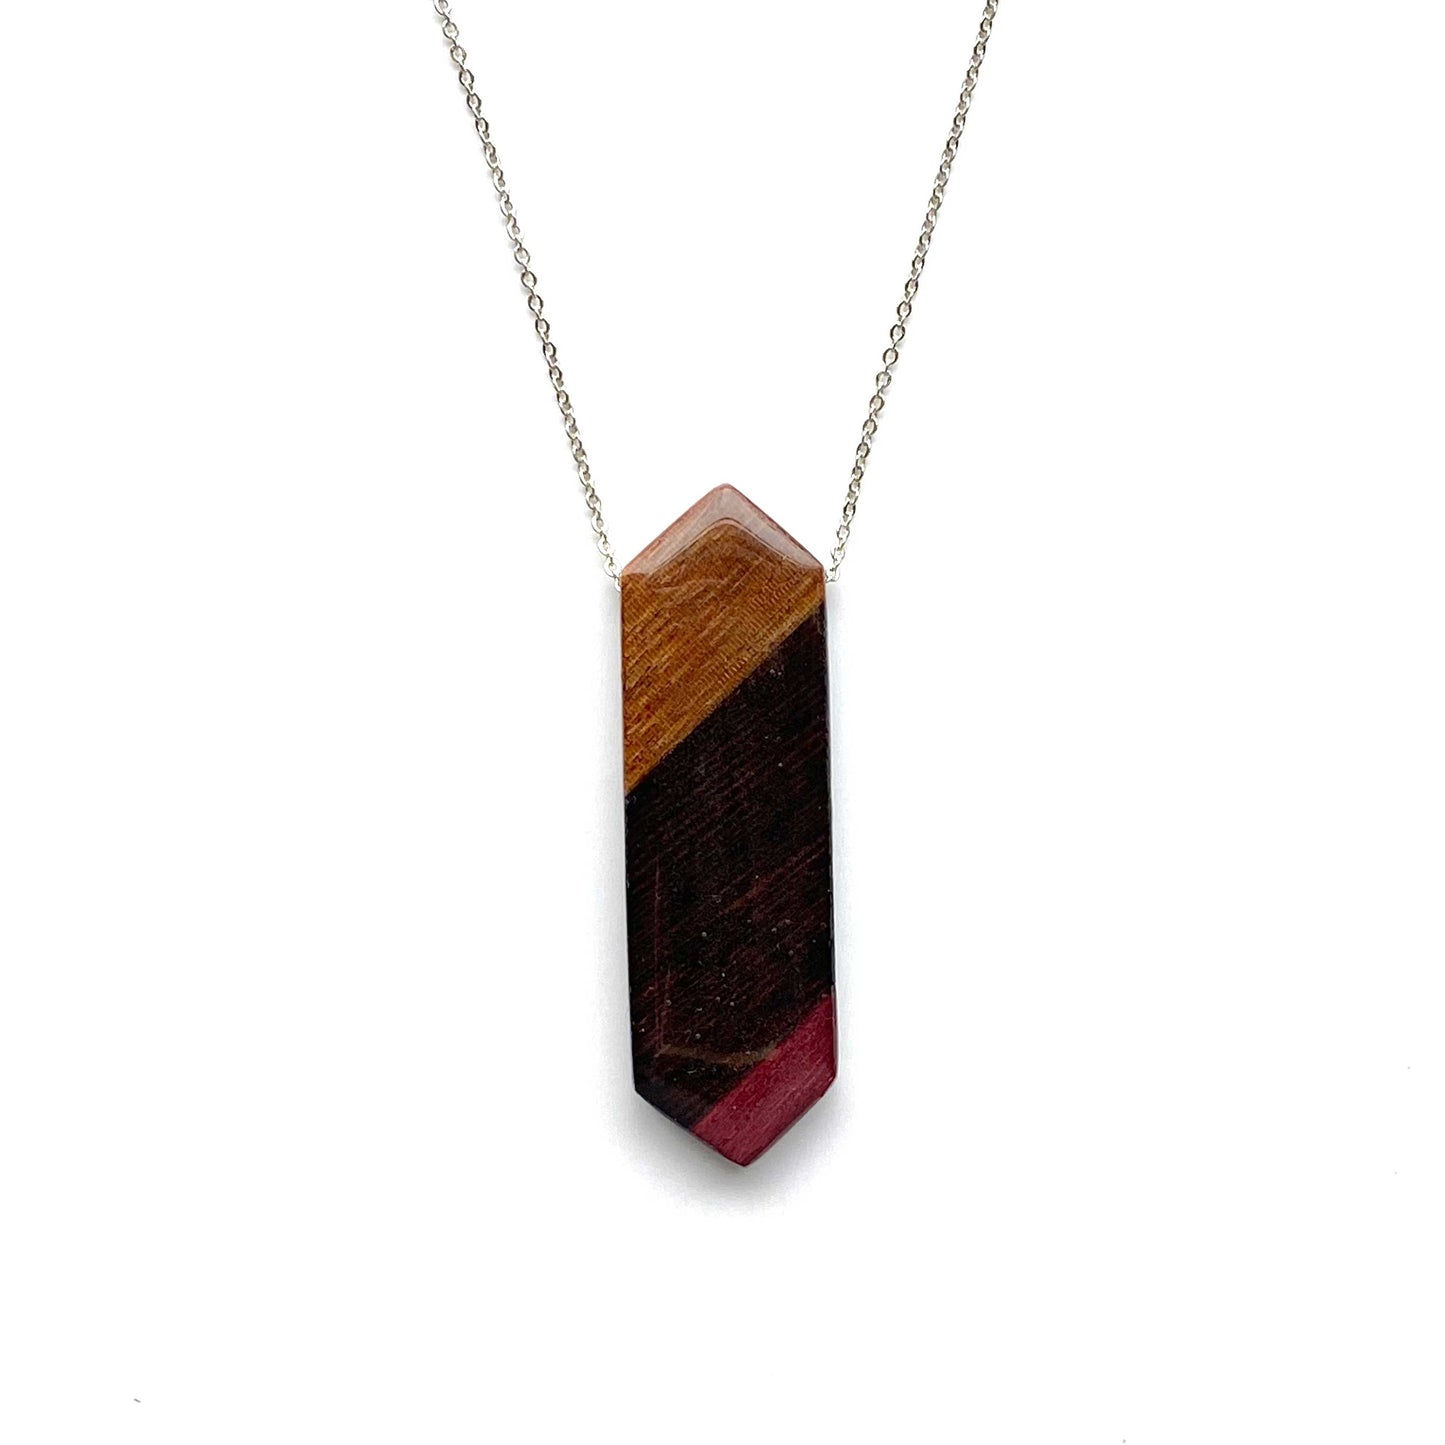 Elongated Hexagon Reclaimed Wood Necklace